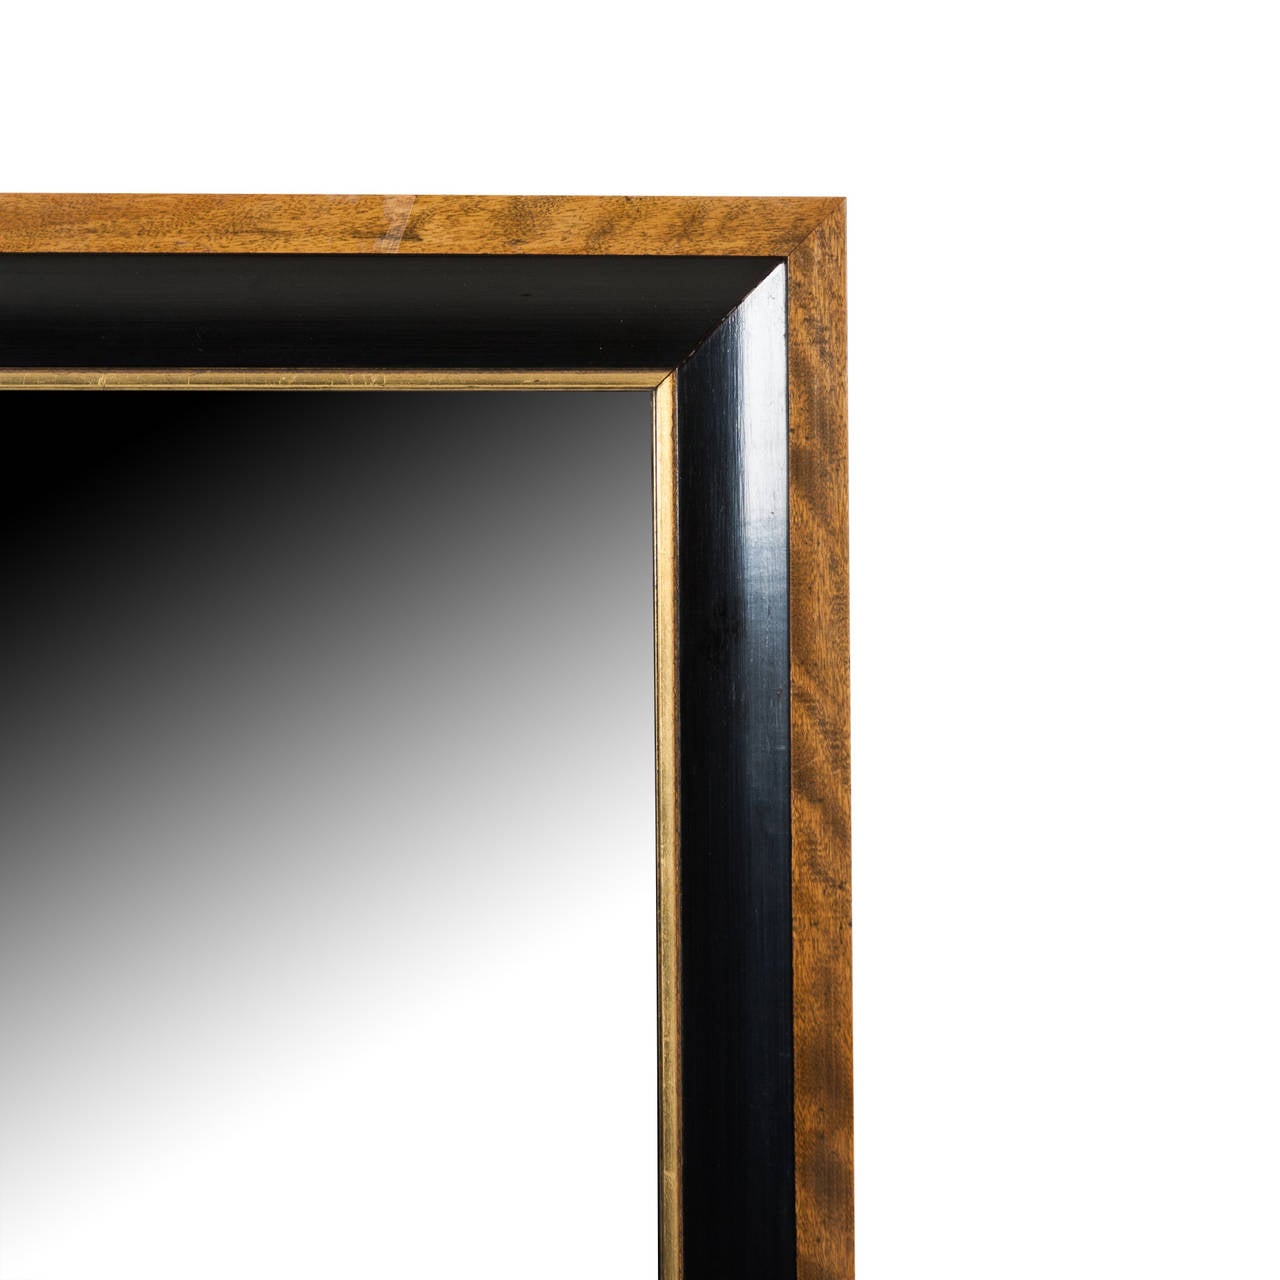 Mahogany and ebonized rectangular frame mirror, outer mahogany border with ebonized curved well, giltwood detail surrounding mirrored glass, American, 1960s. Measures: Height 27 in, width 23 in and depth 1 3/4 in. (Item #2308 sats) 

Note: Minor